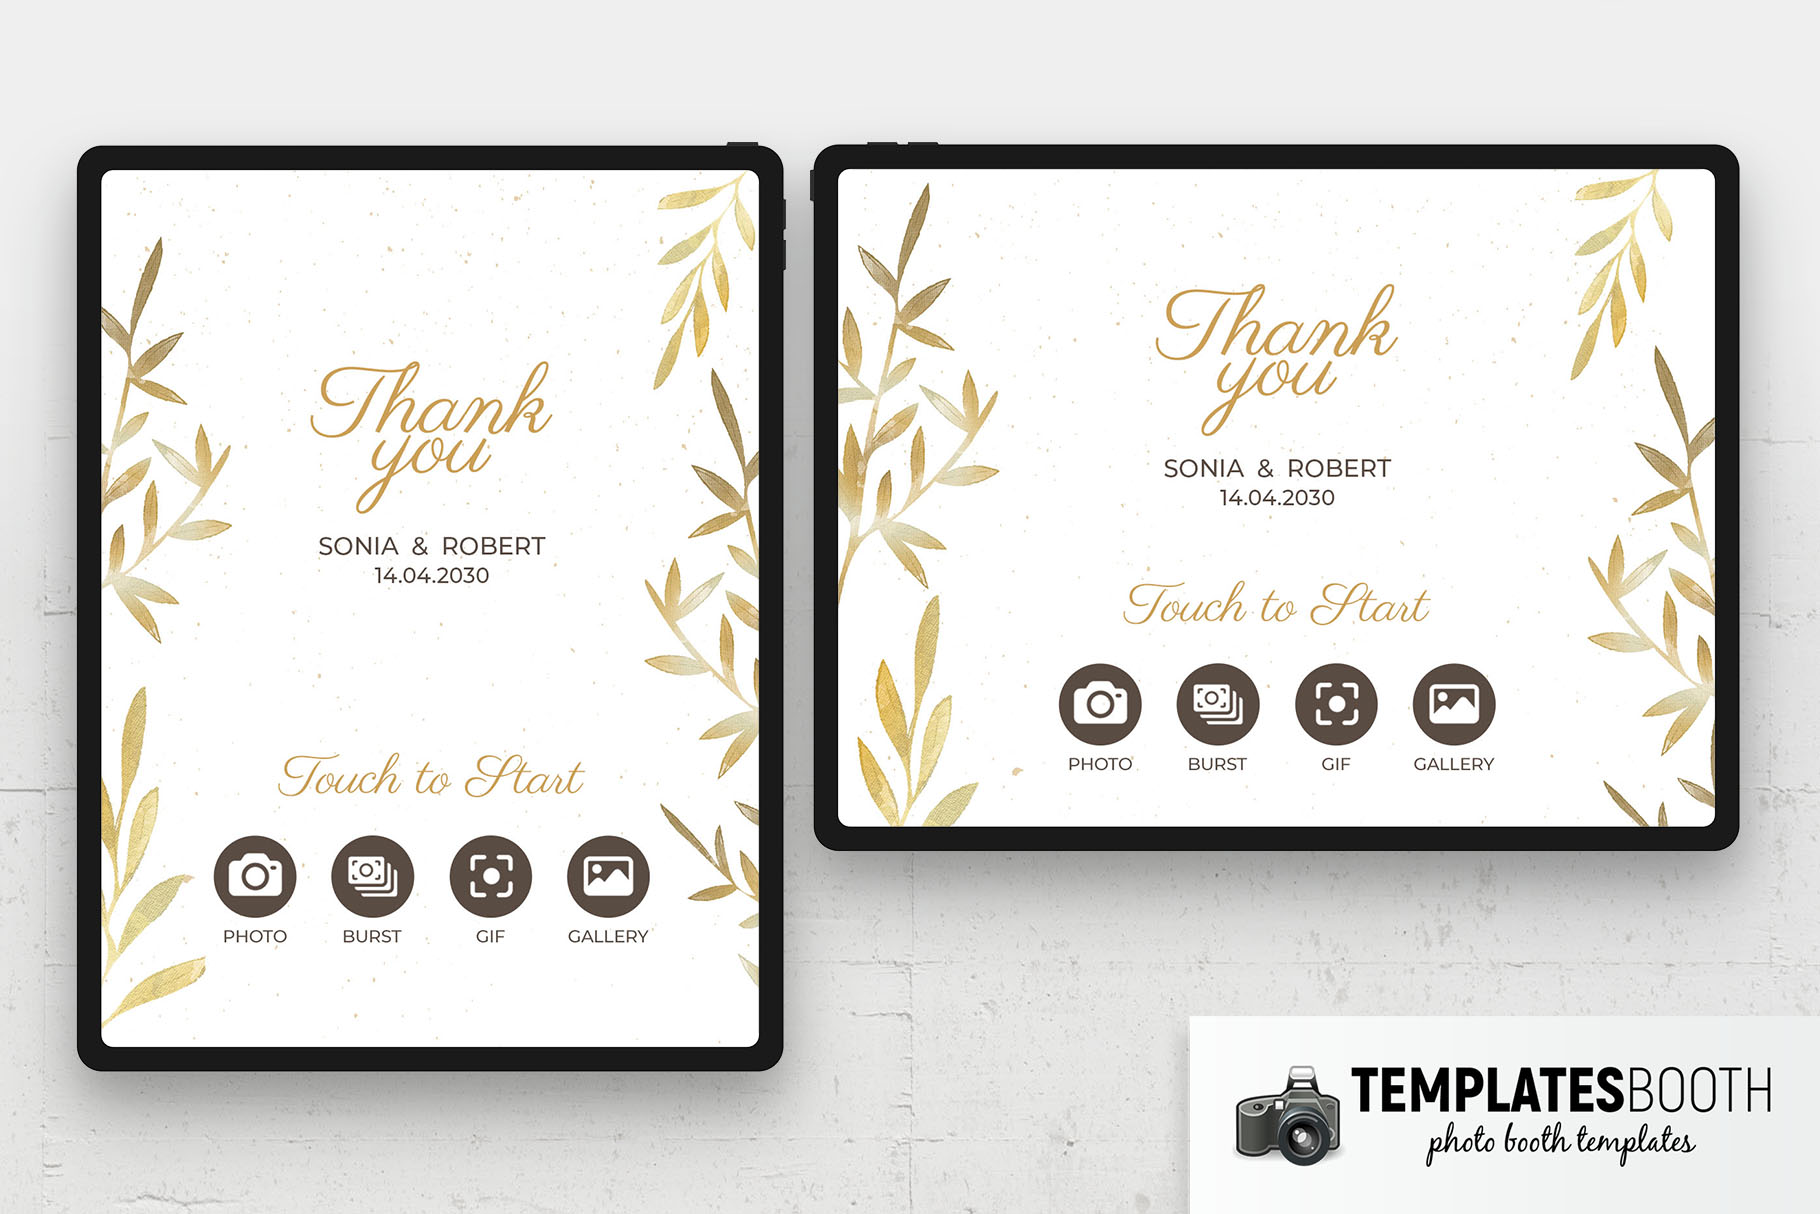 Free Wedding Photo Booth Welcome Screen